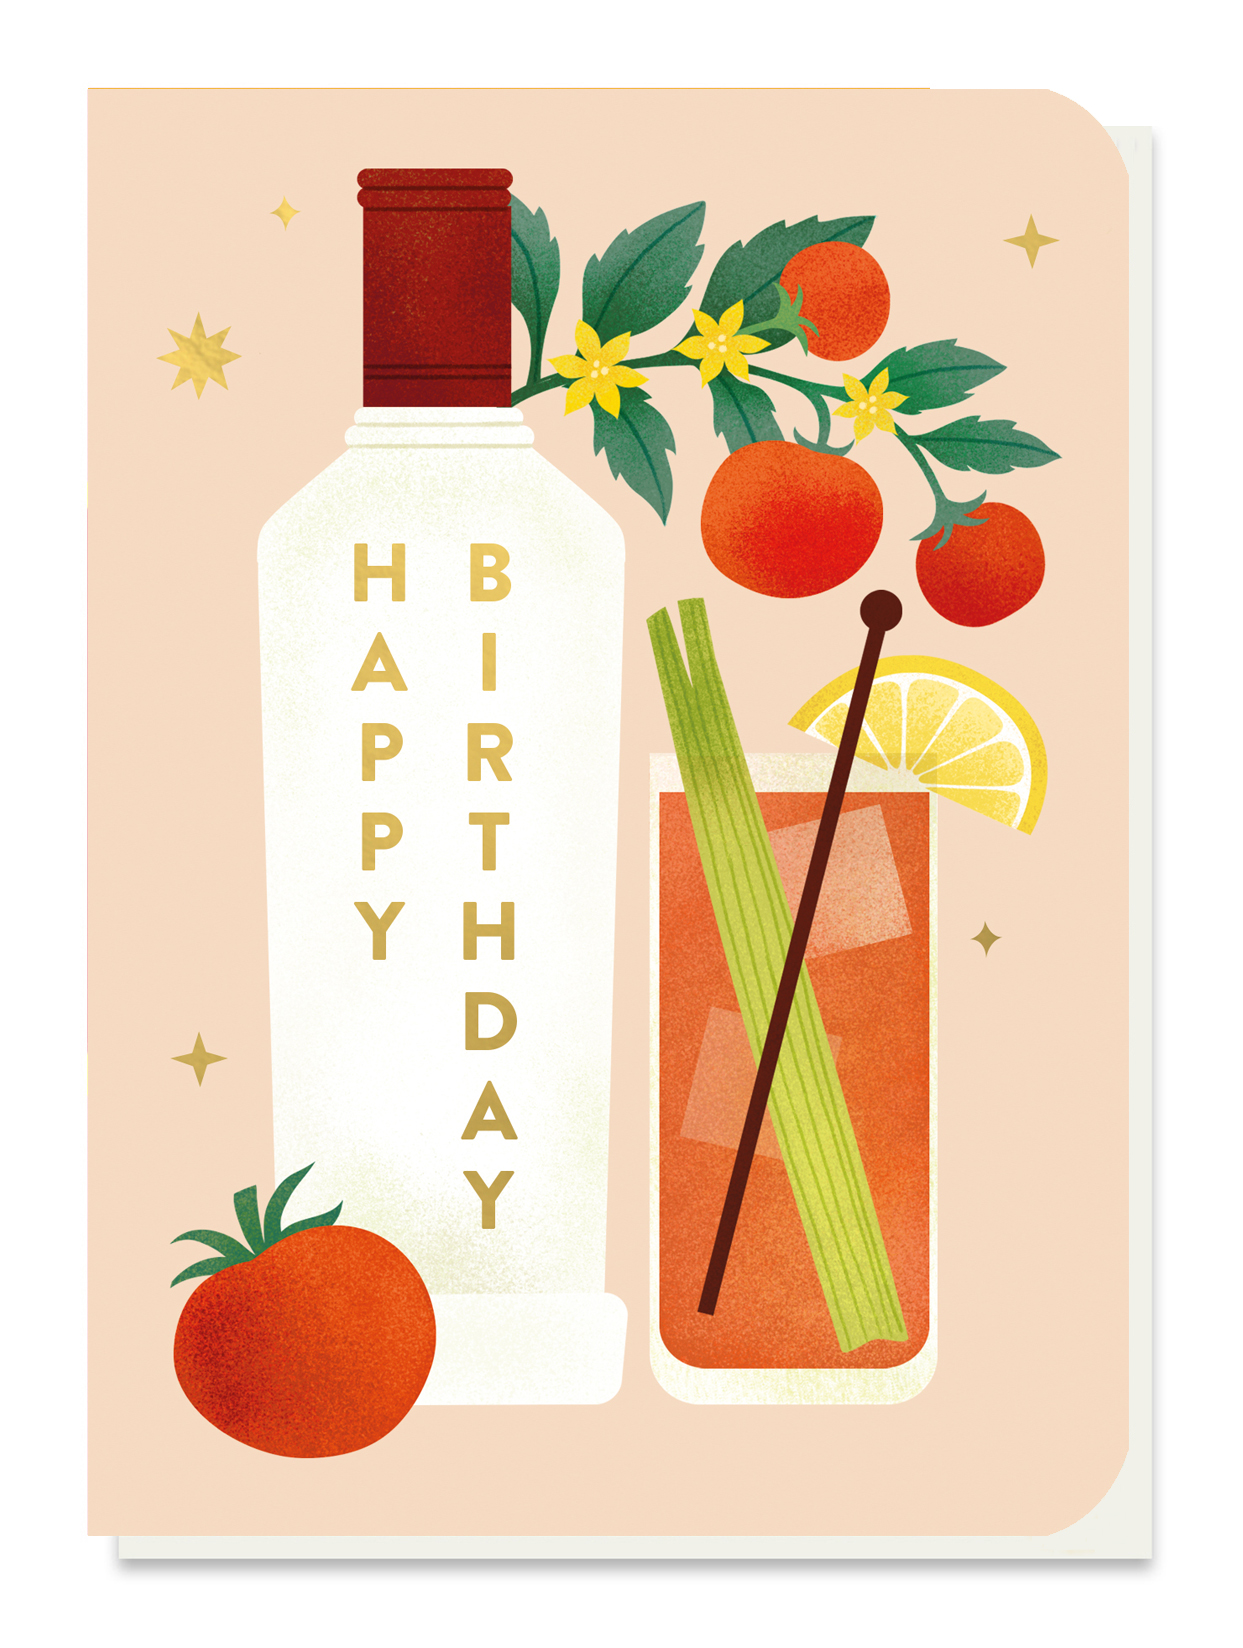 bloody mary birthday card with tomato plant seed sticks by stormy knight